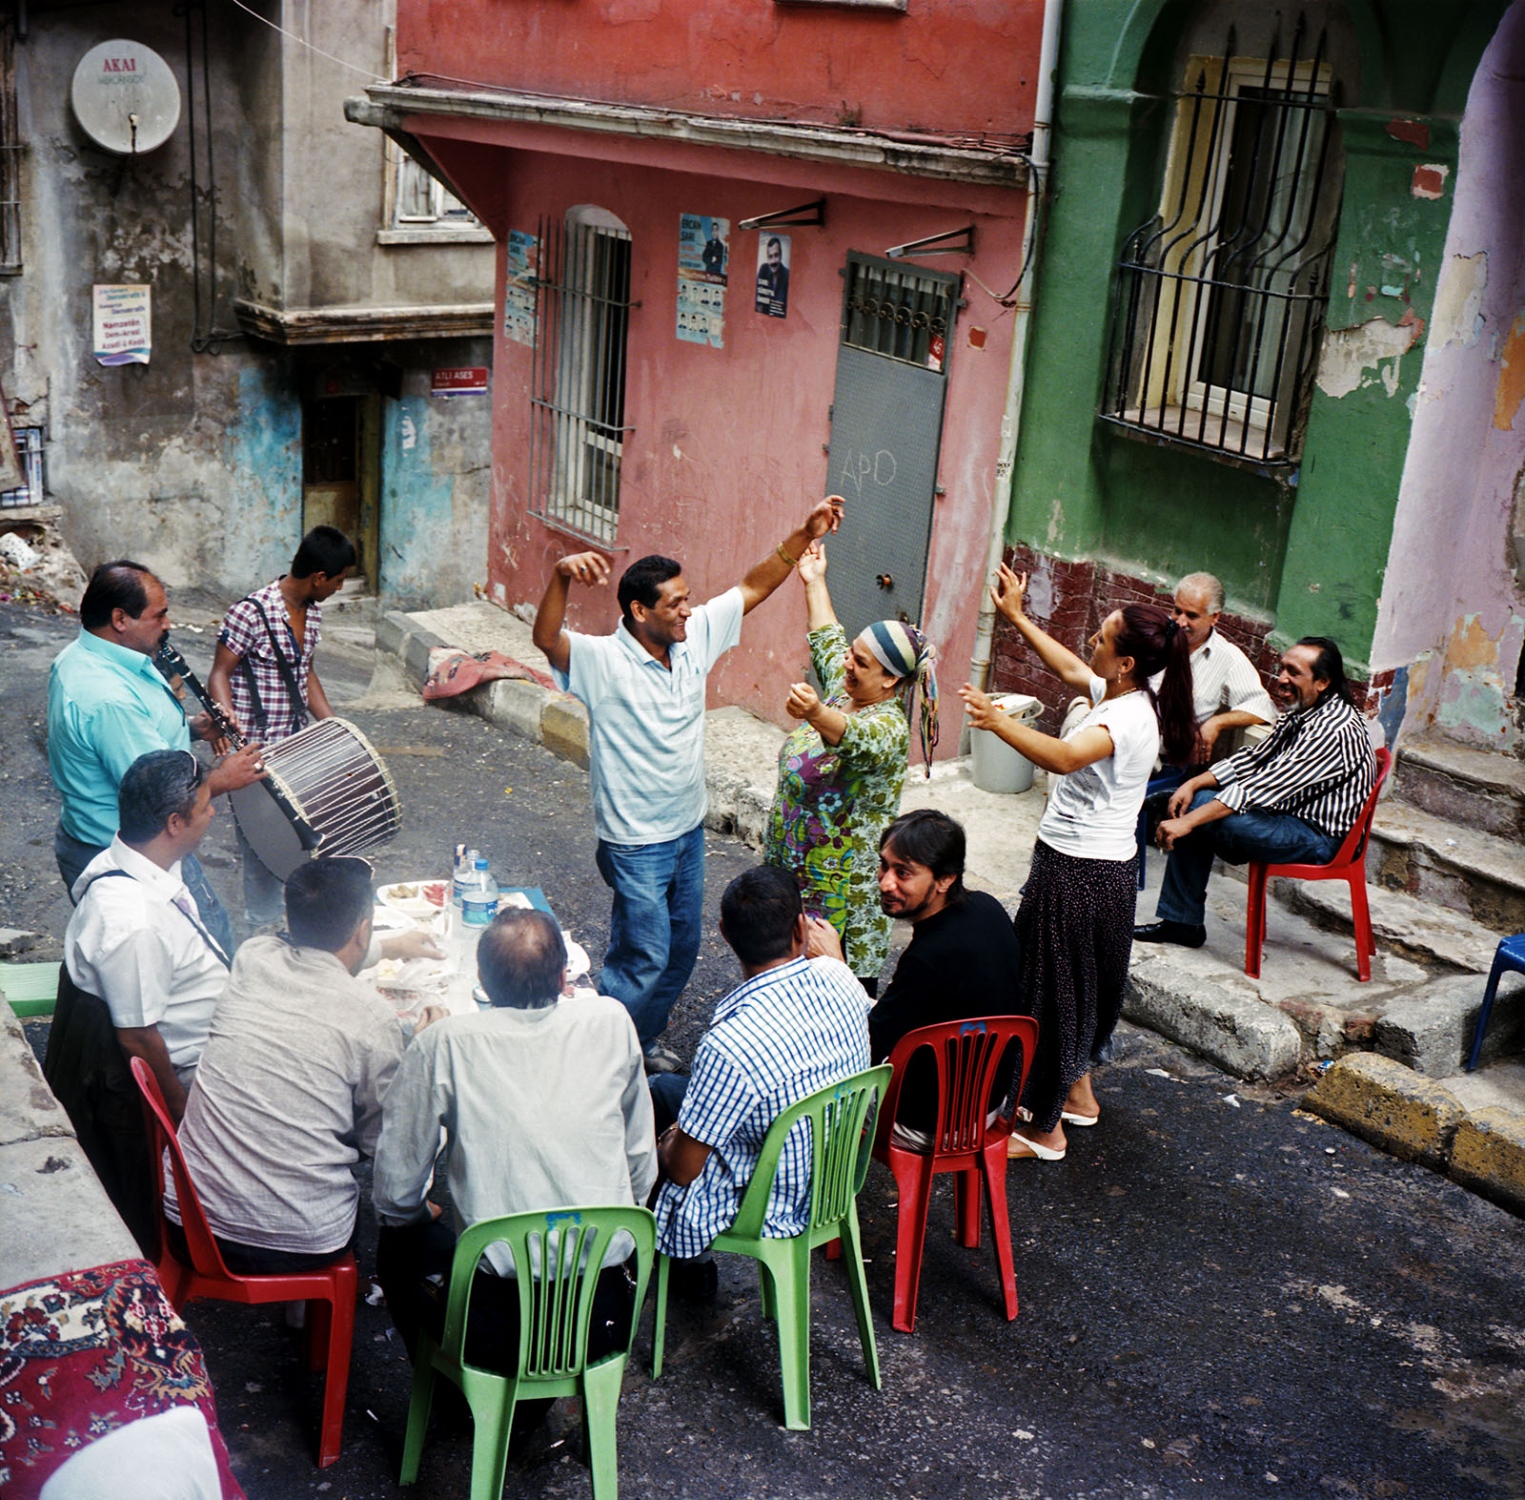 Last Dance of Tarlabasi - Roma family and community members dance on the street at...